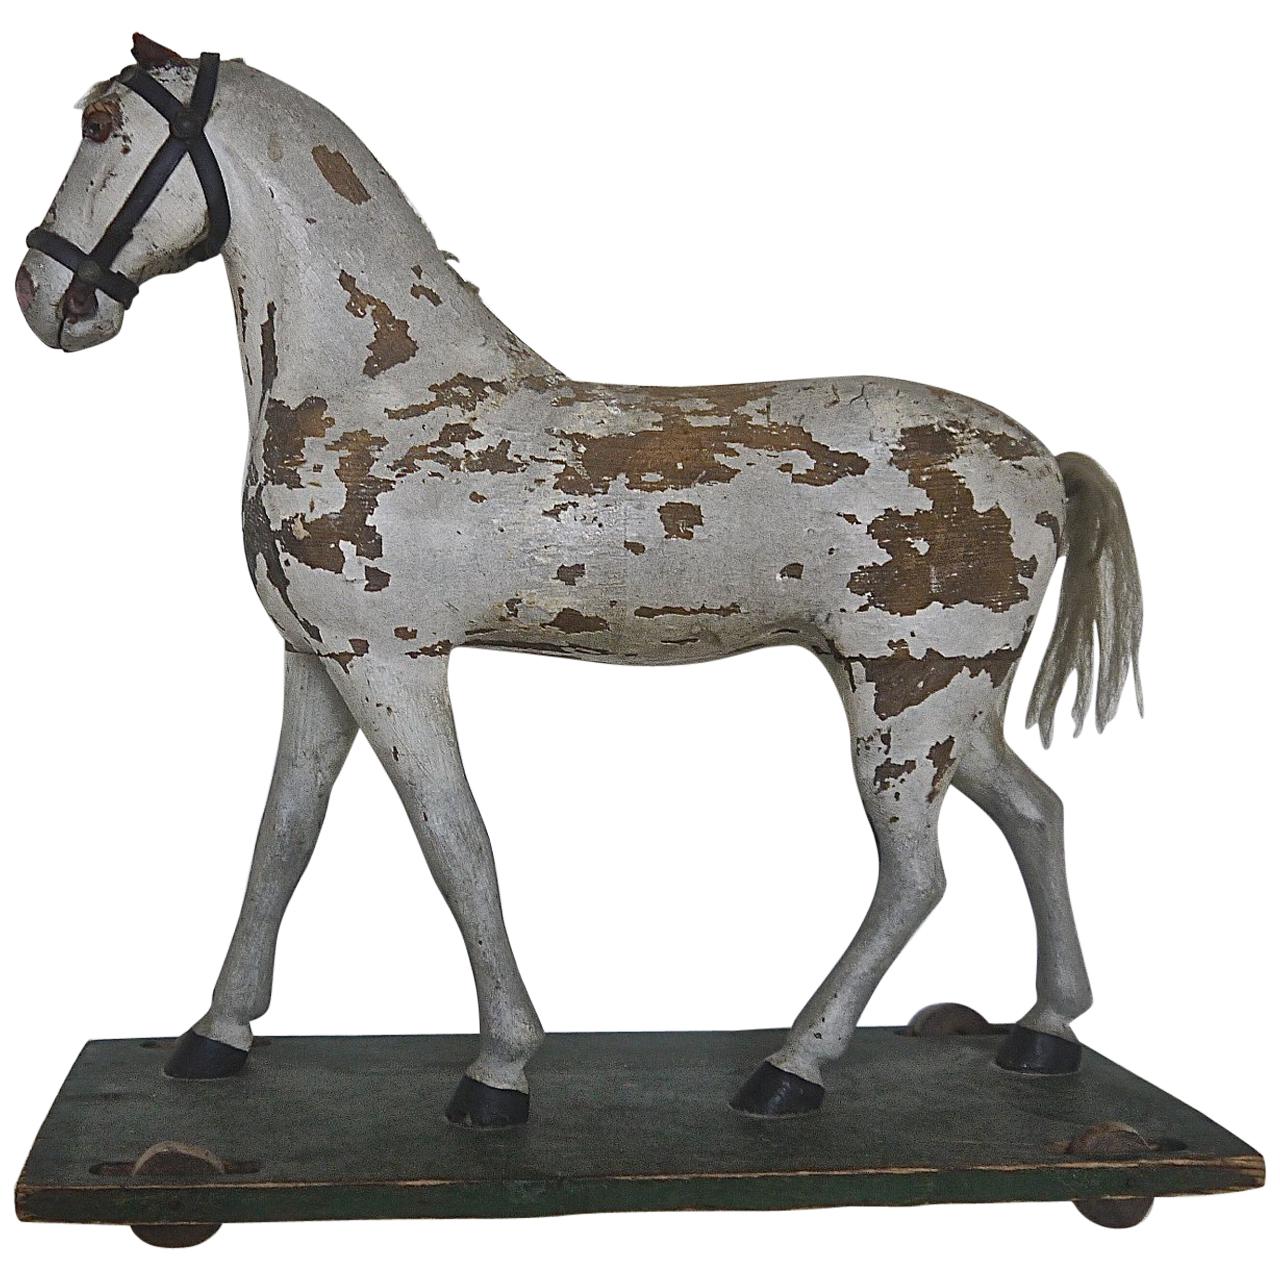  Painted Toy Wooden Horse on Wheels, Swedish 19th Century For Sale